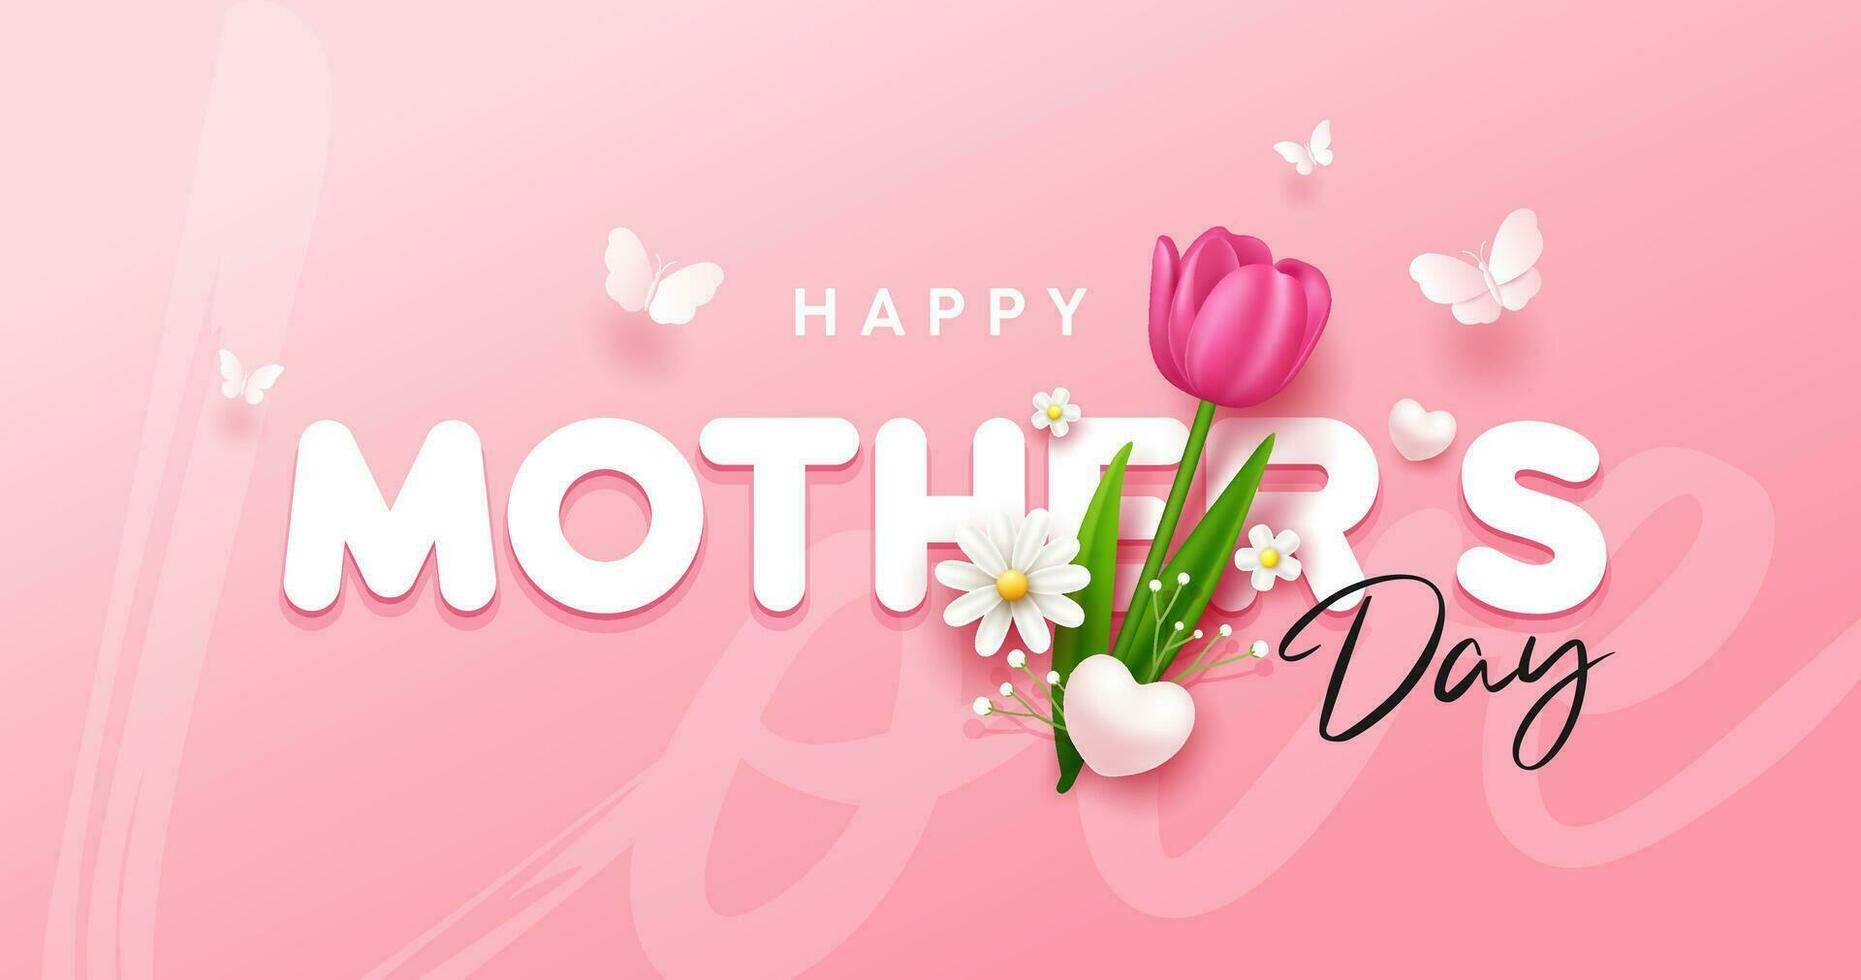 Happy Mother's day with tulip flowers and butterfly banner design on pink background, EPS10 Vector illustration.